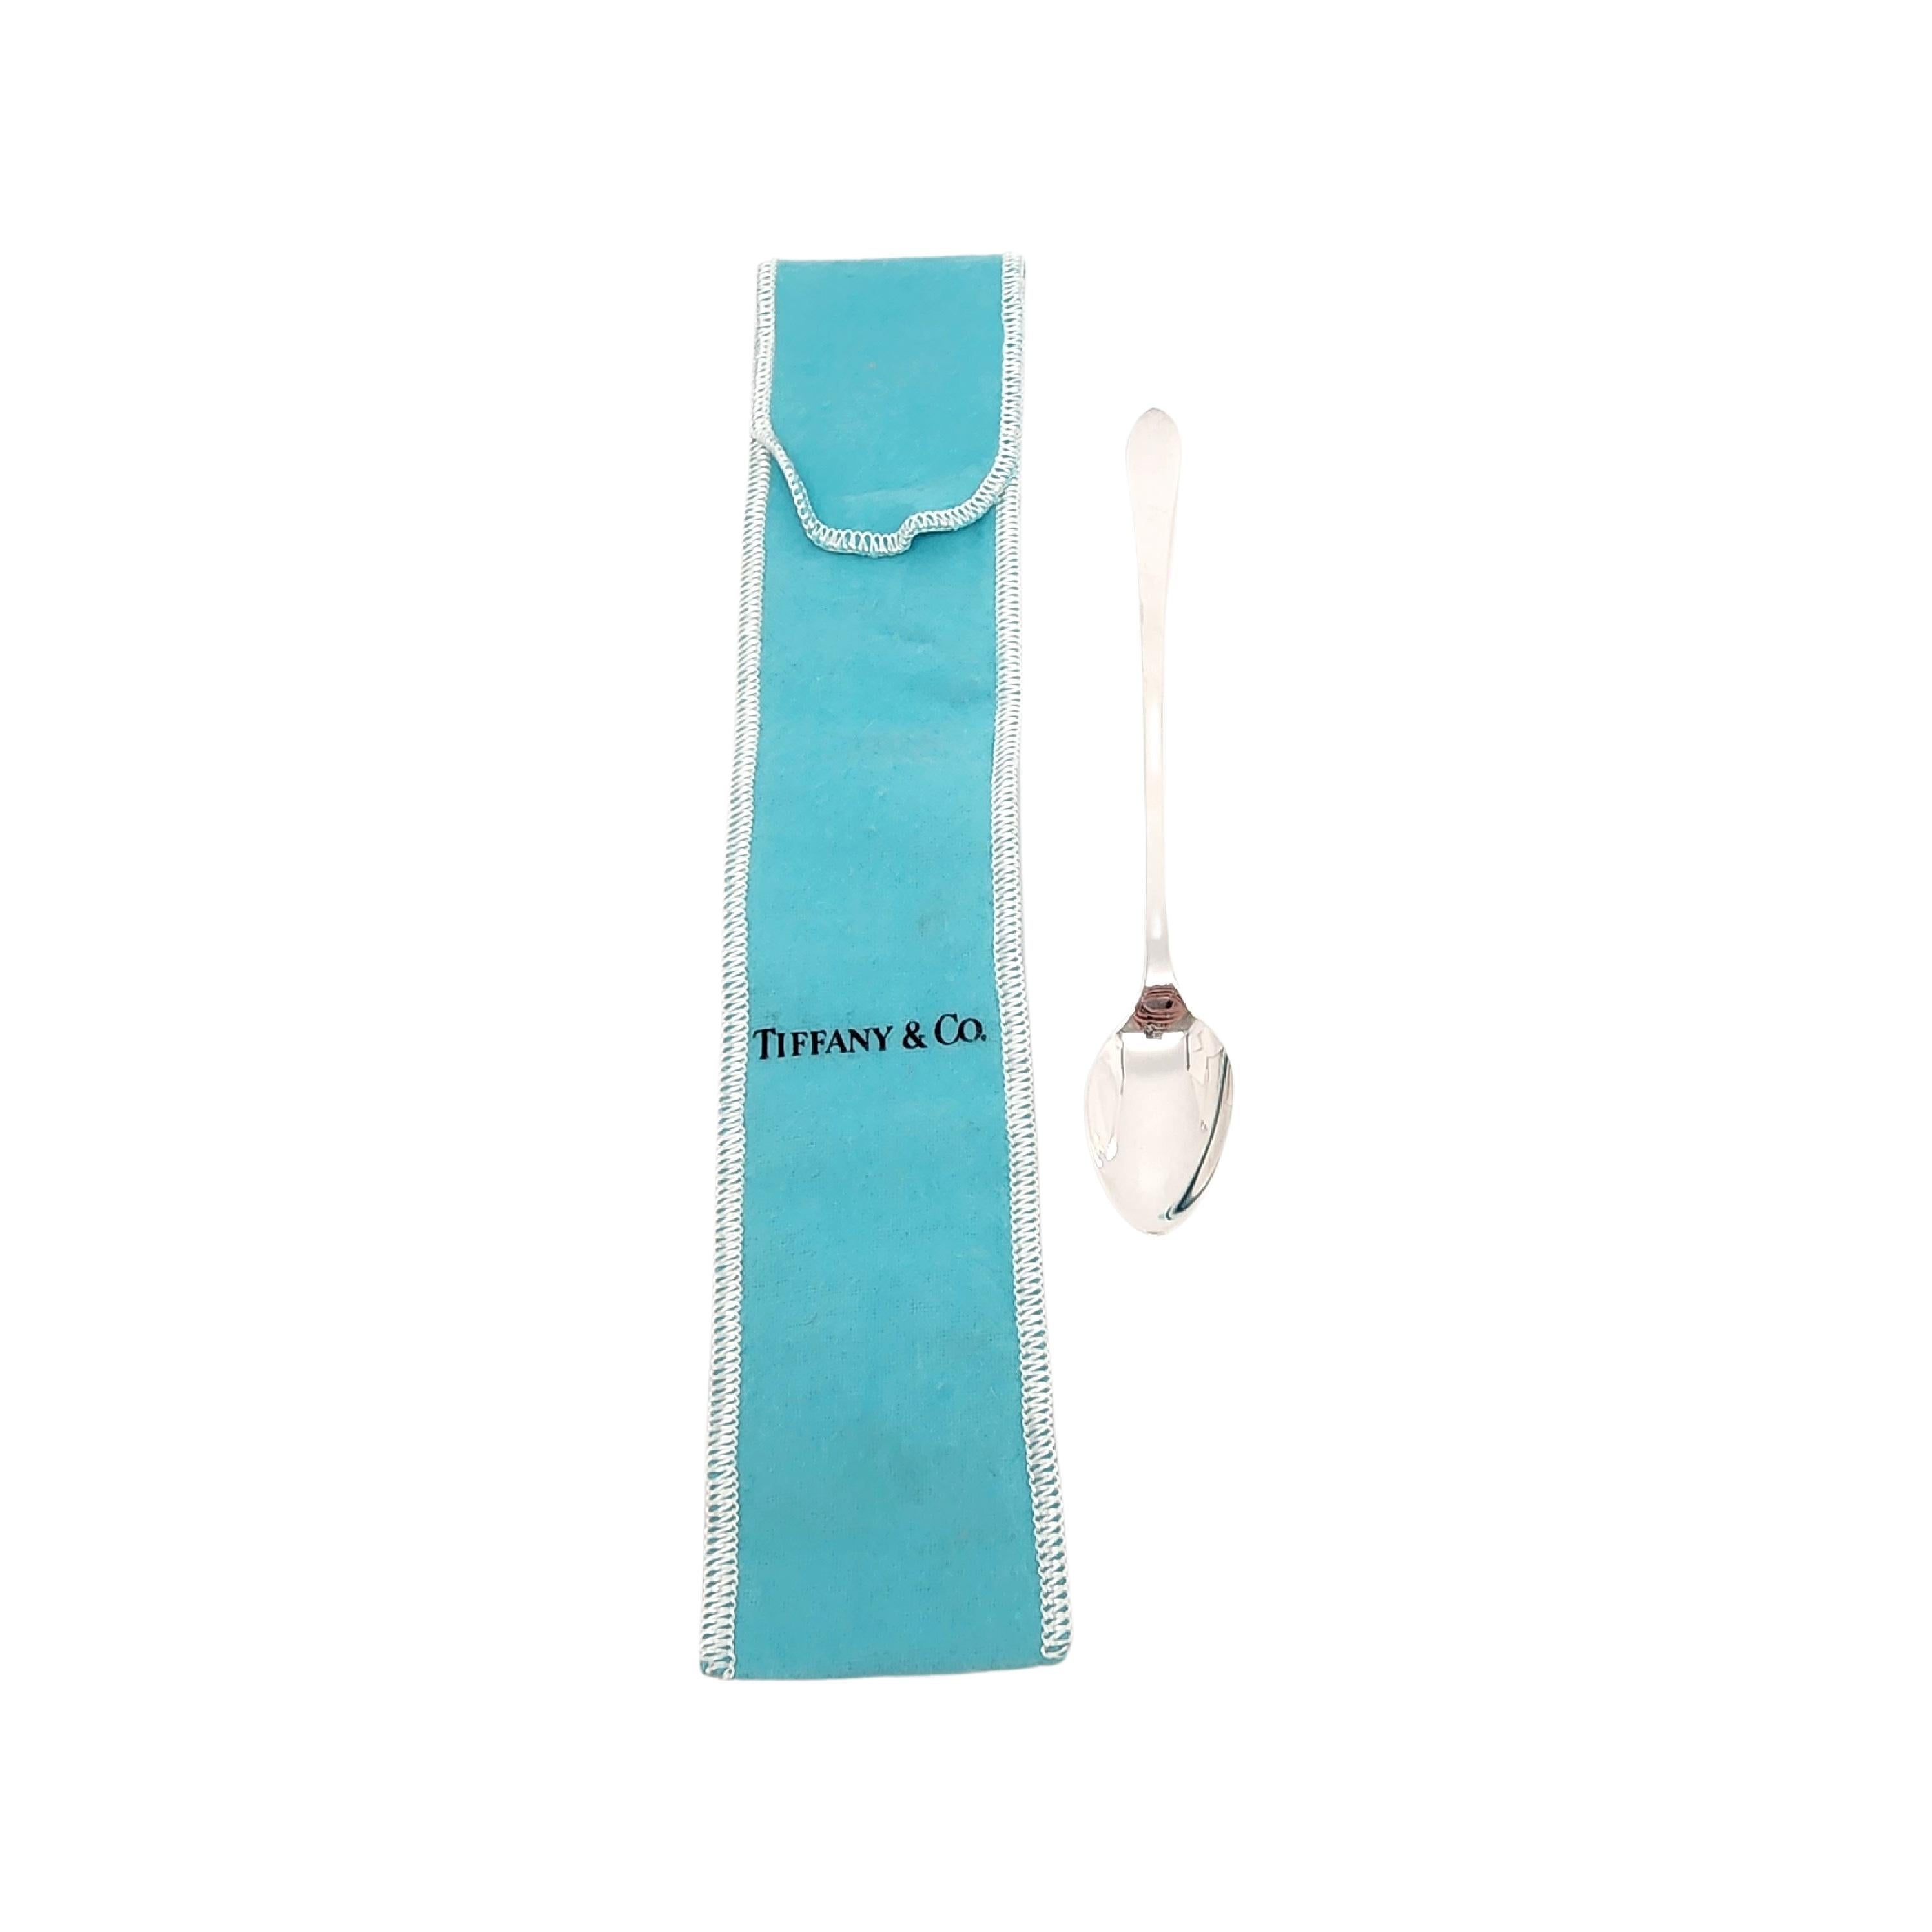 Tiffany & Co. Sterling Silver Faneuil Baby Feeding Spoon with Pouch 1